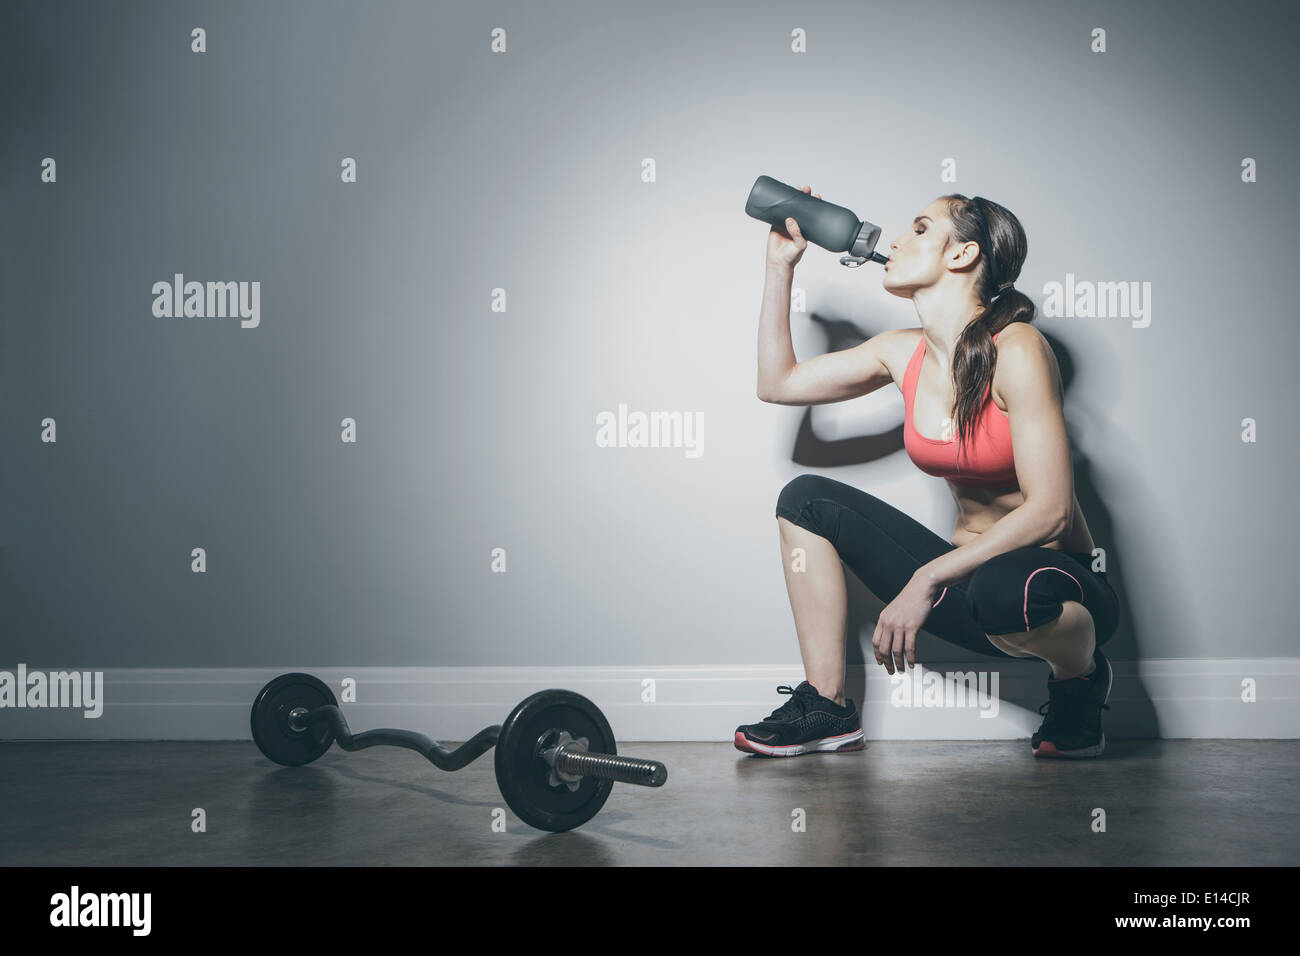 Caucasian woman in sportswear drinking from water bottle Banque D'Images